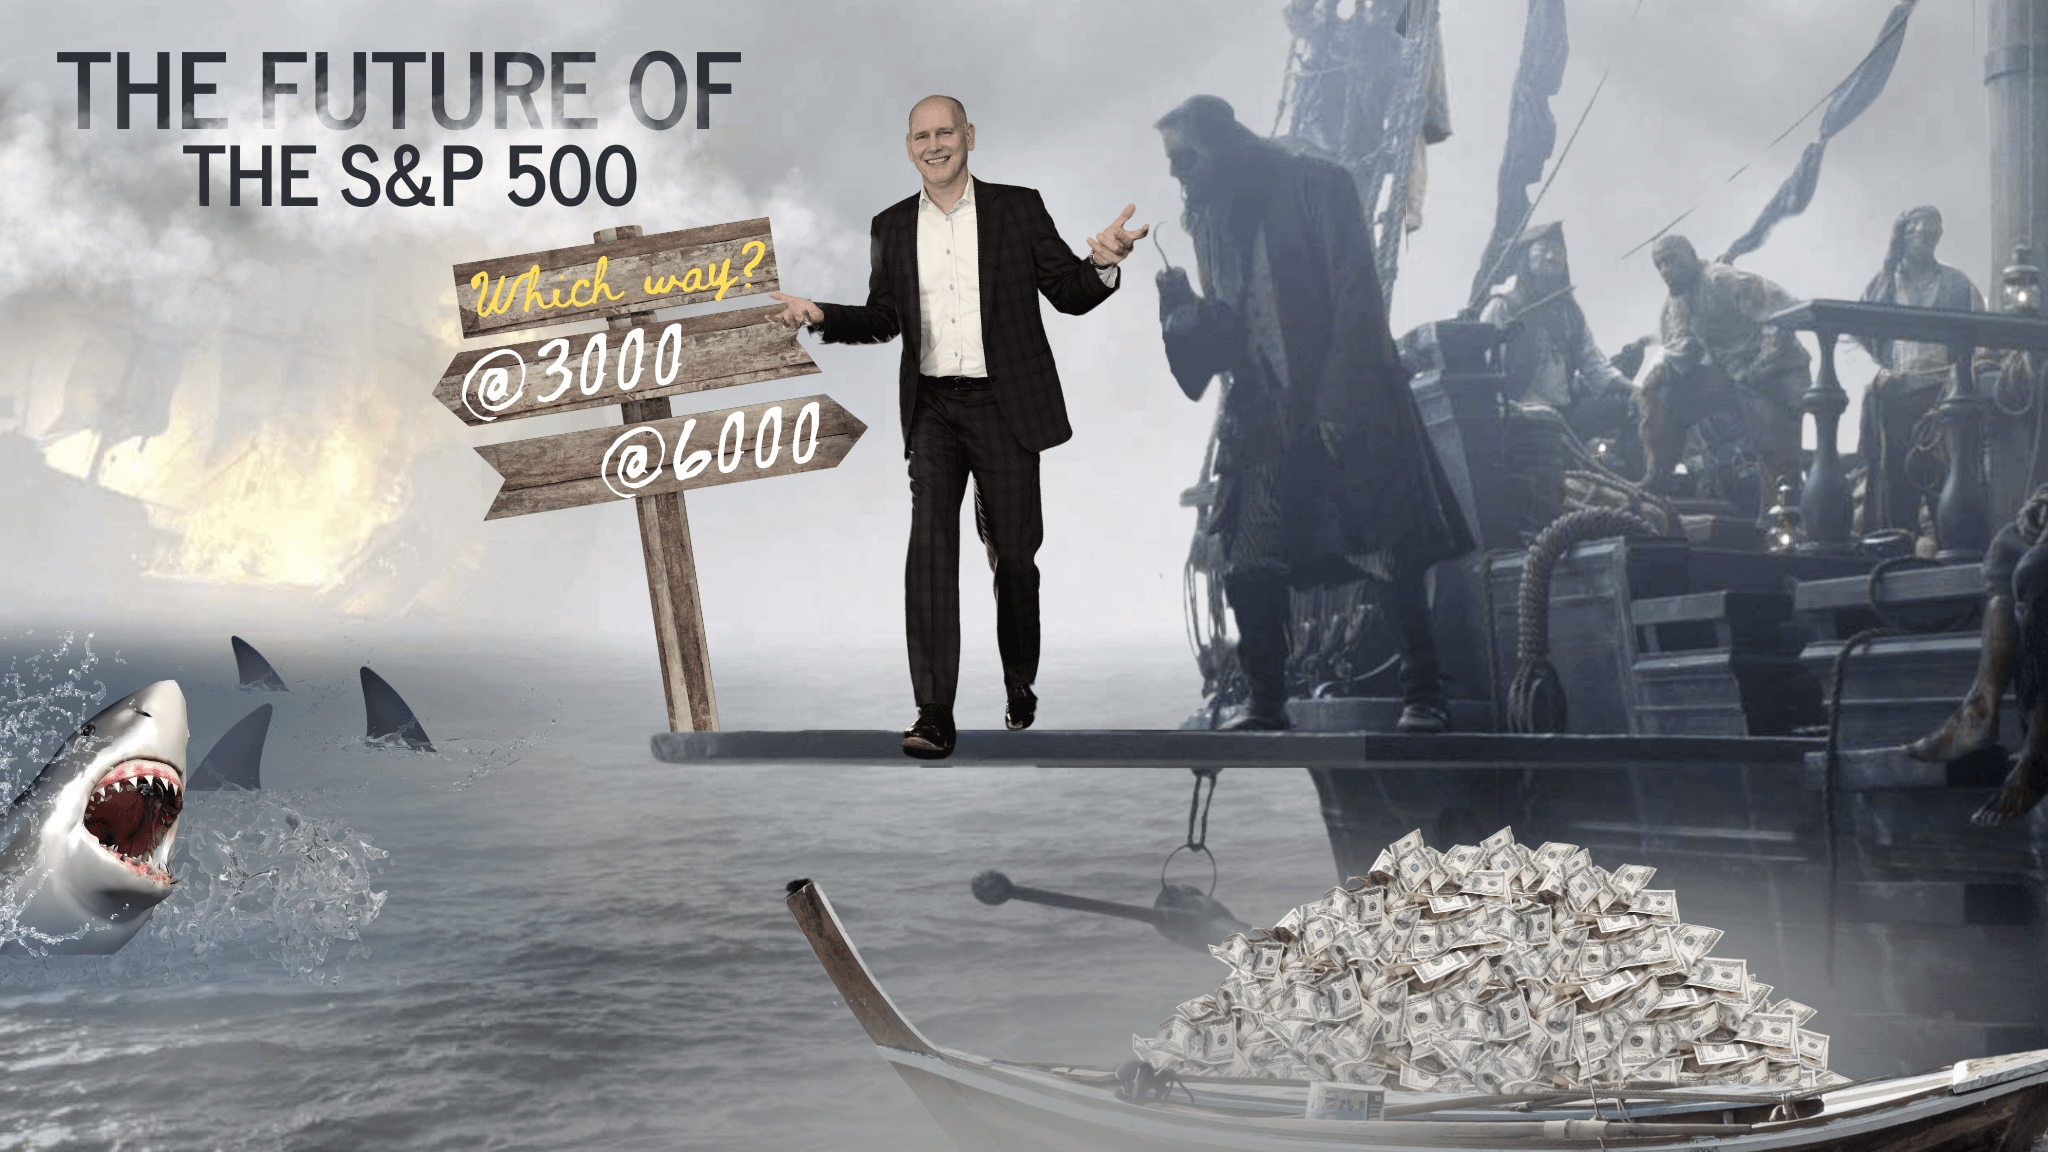 The future of the s&p 500: which way? 3000 or 6000?